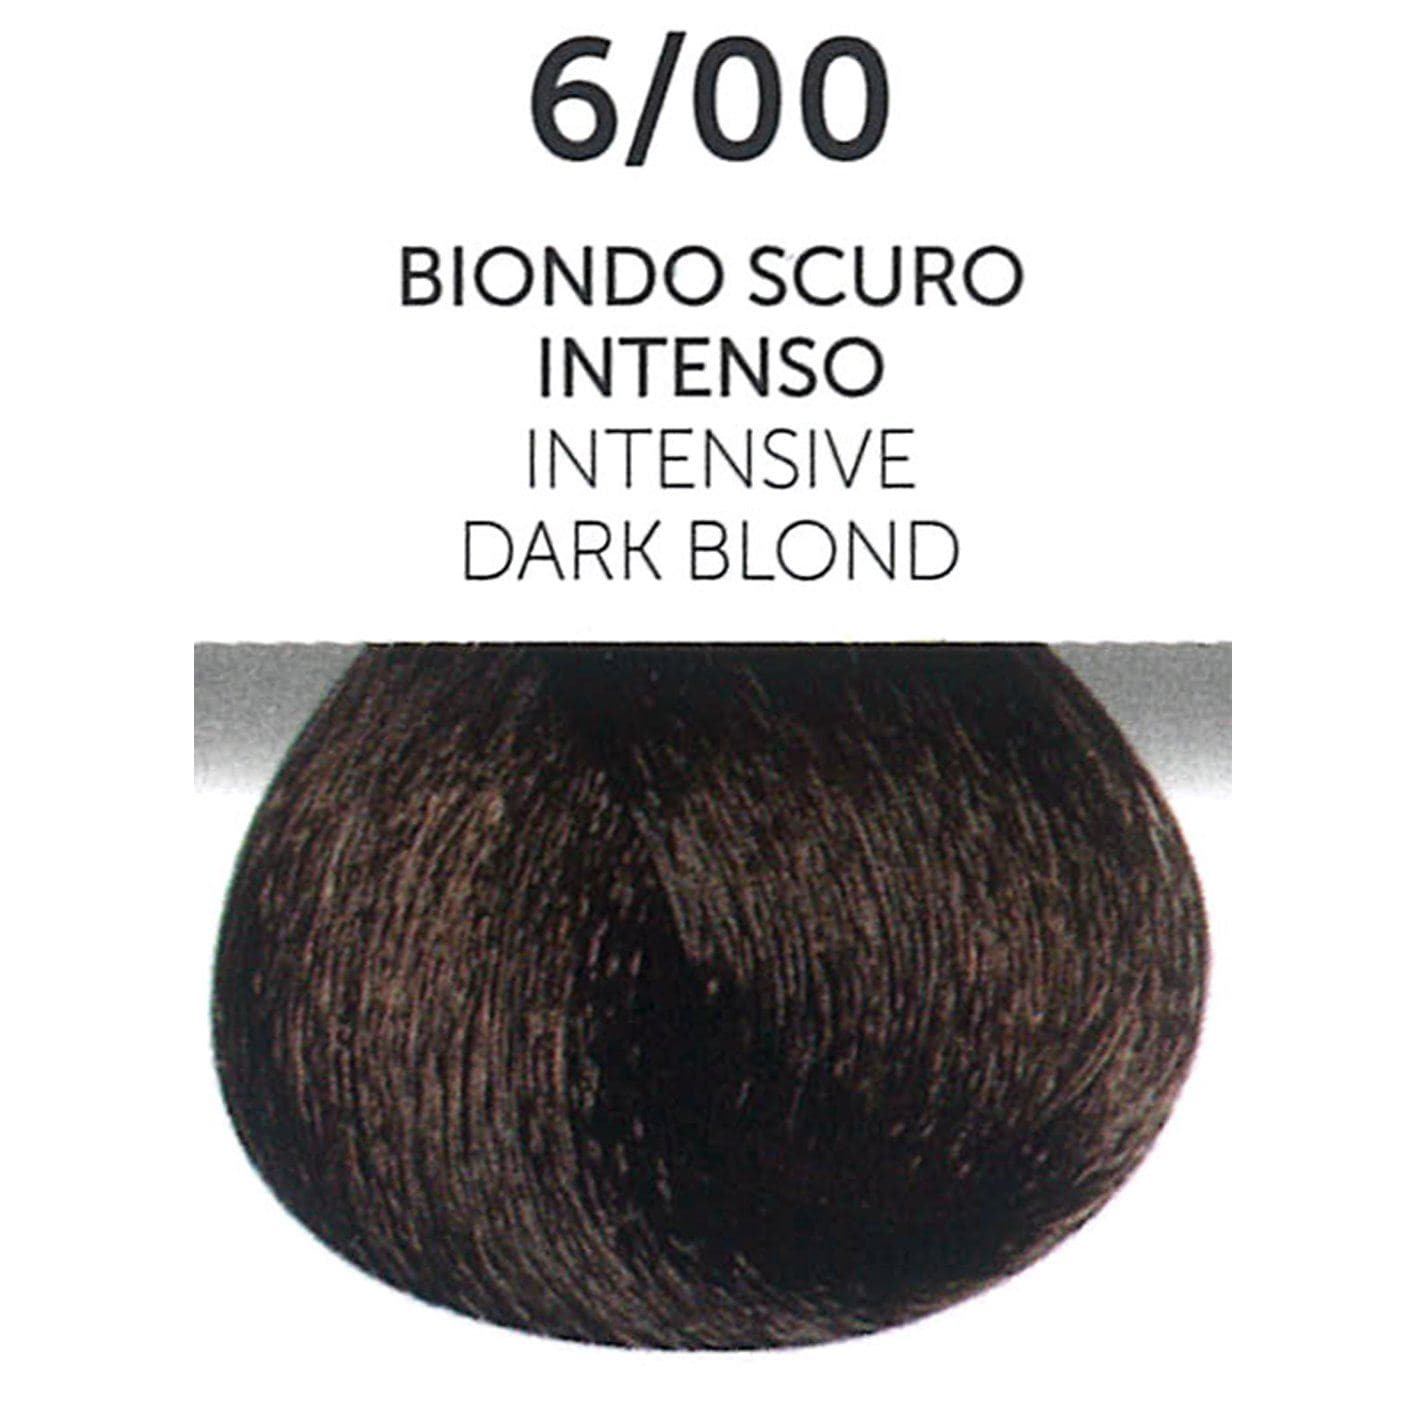 6/00 Intensive Dark Blond | Permanent Hair Color | Perlacolor HAIR COLOR OYSTER 